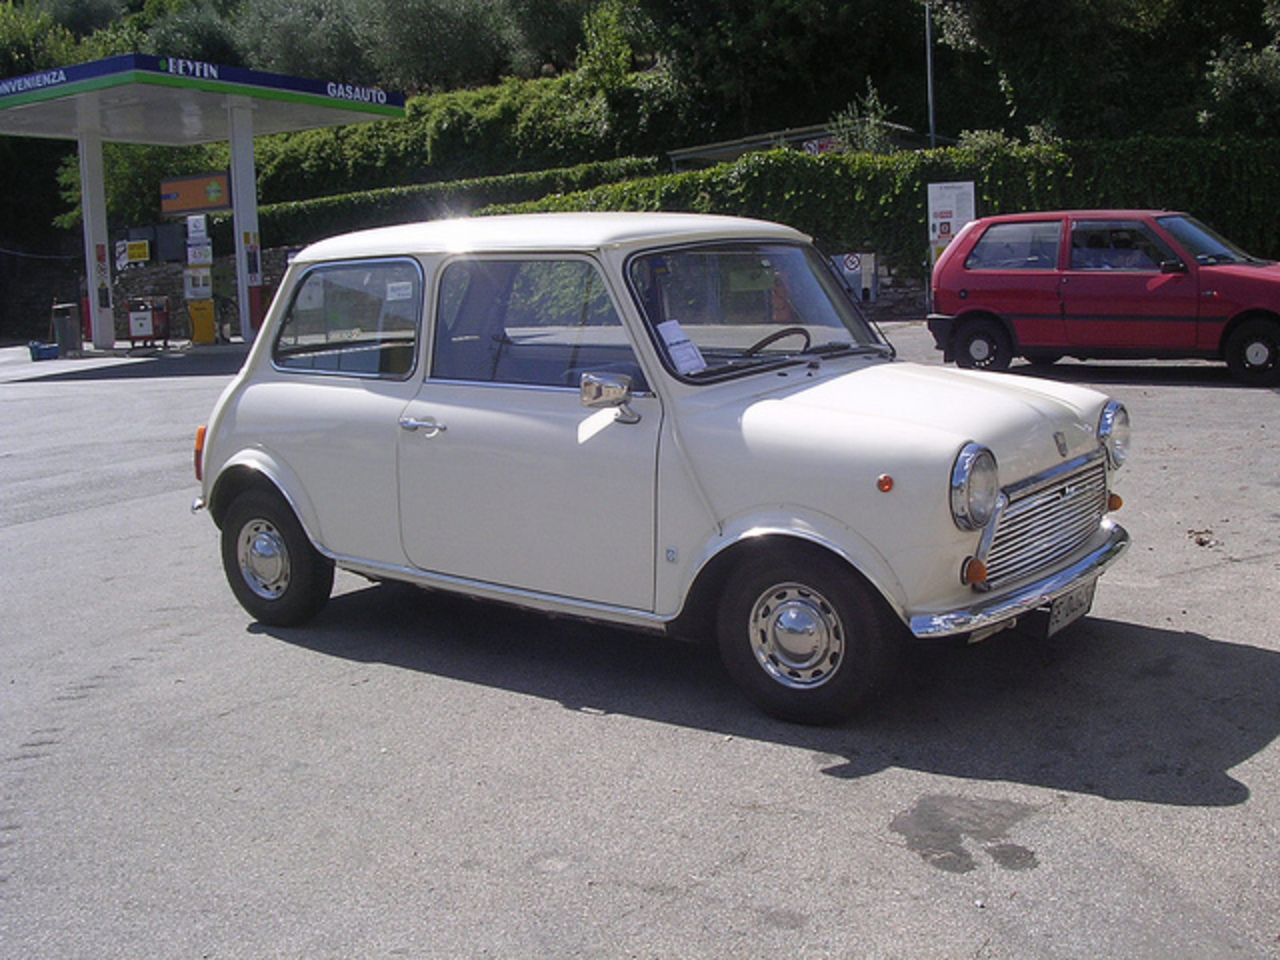 Morris Mini 1000 Firenze Florence Italy August 2011 front | Flickr ...